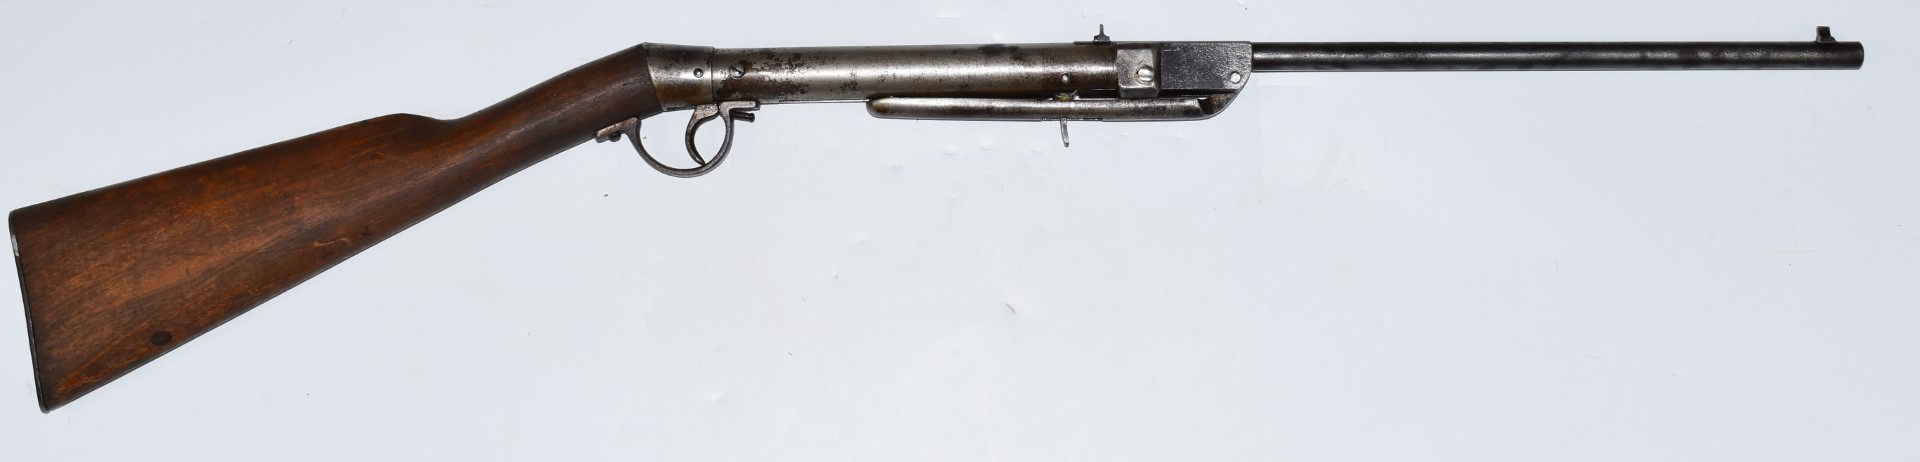 Friedrich Langenhan The Millita Patent .177 air rifle with adjustable trigger and alignment - Image 2 of 7